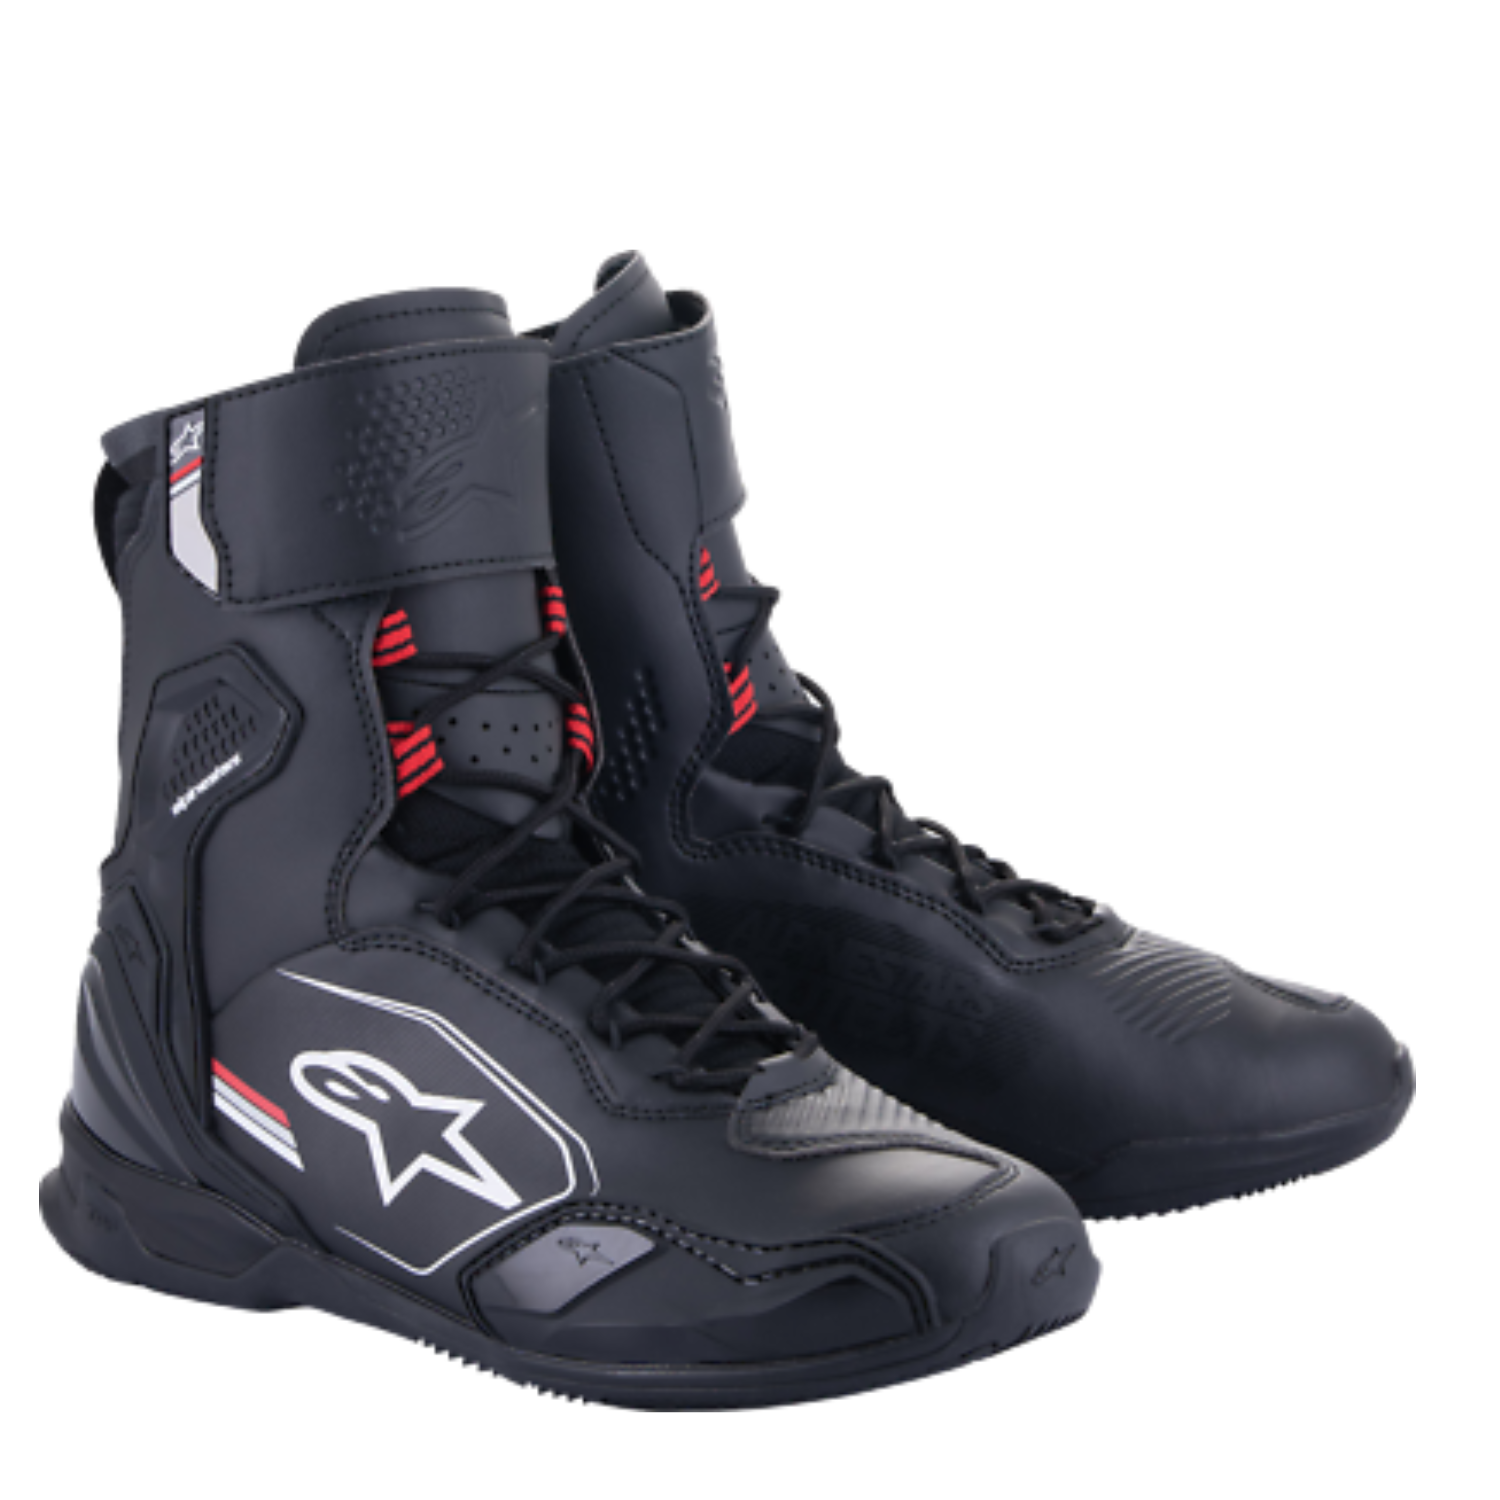 Image of Alpinestars Superfaster Shoes Black Gray Bright Red Taille US 105